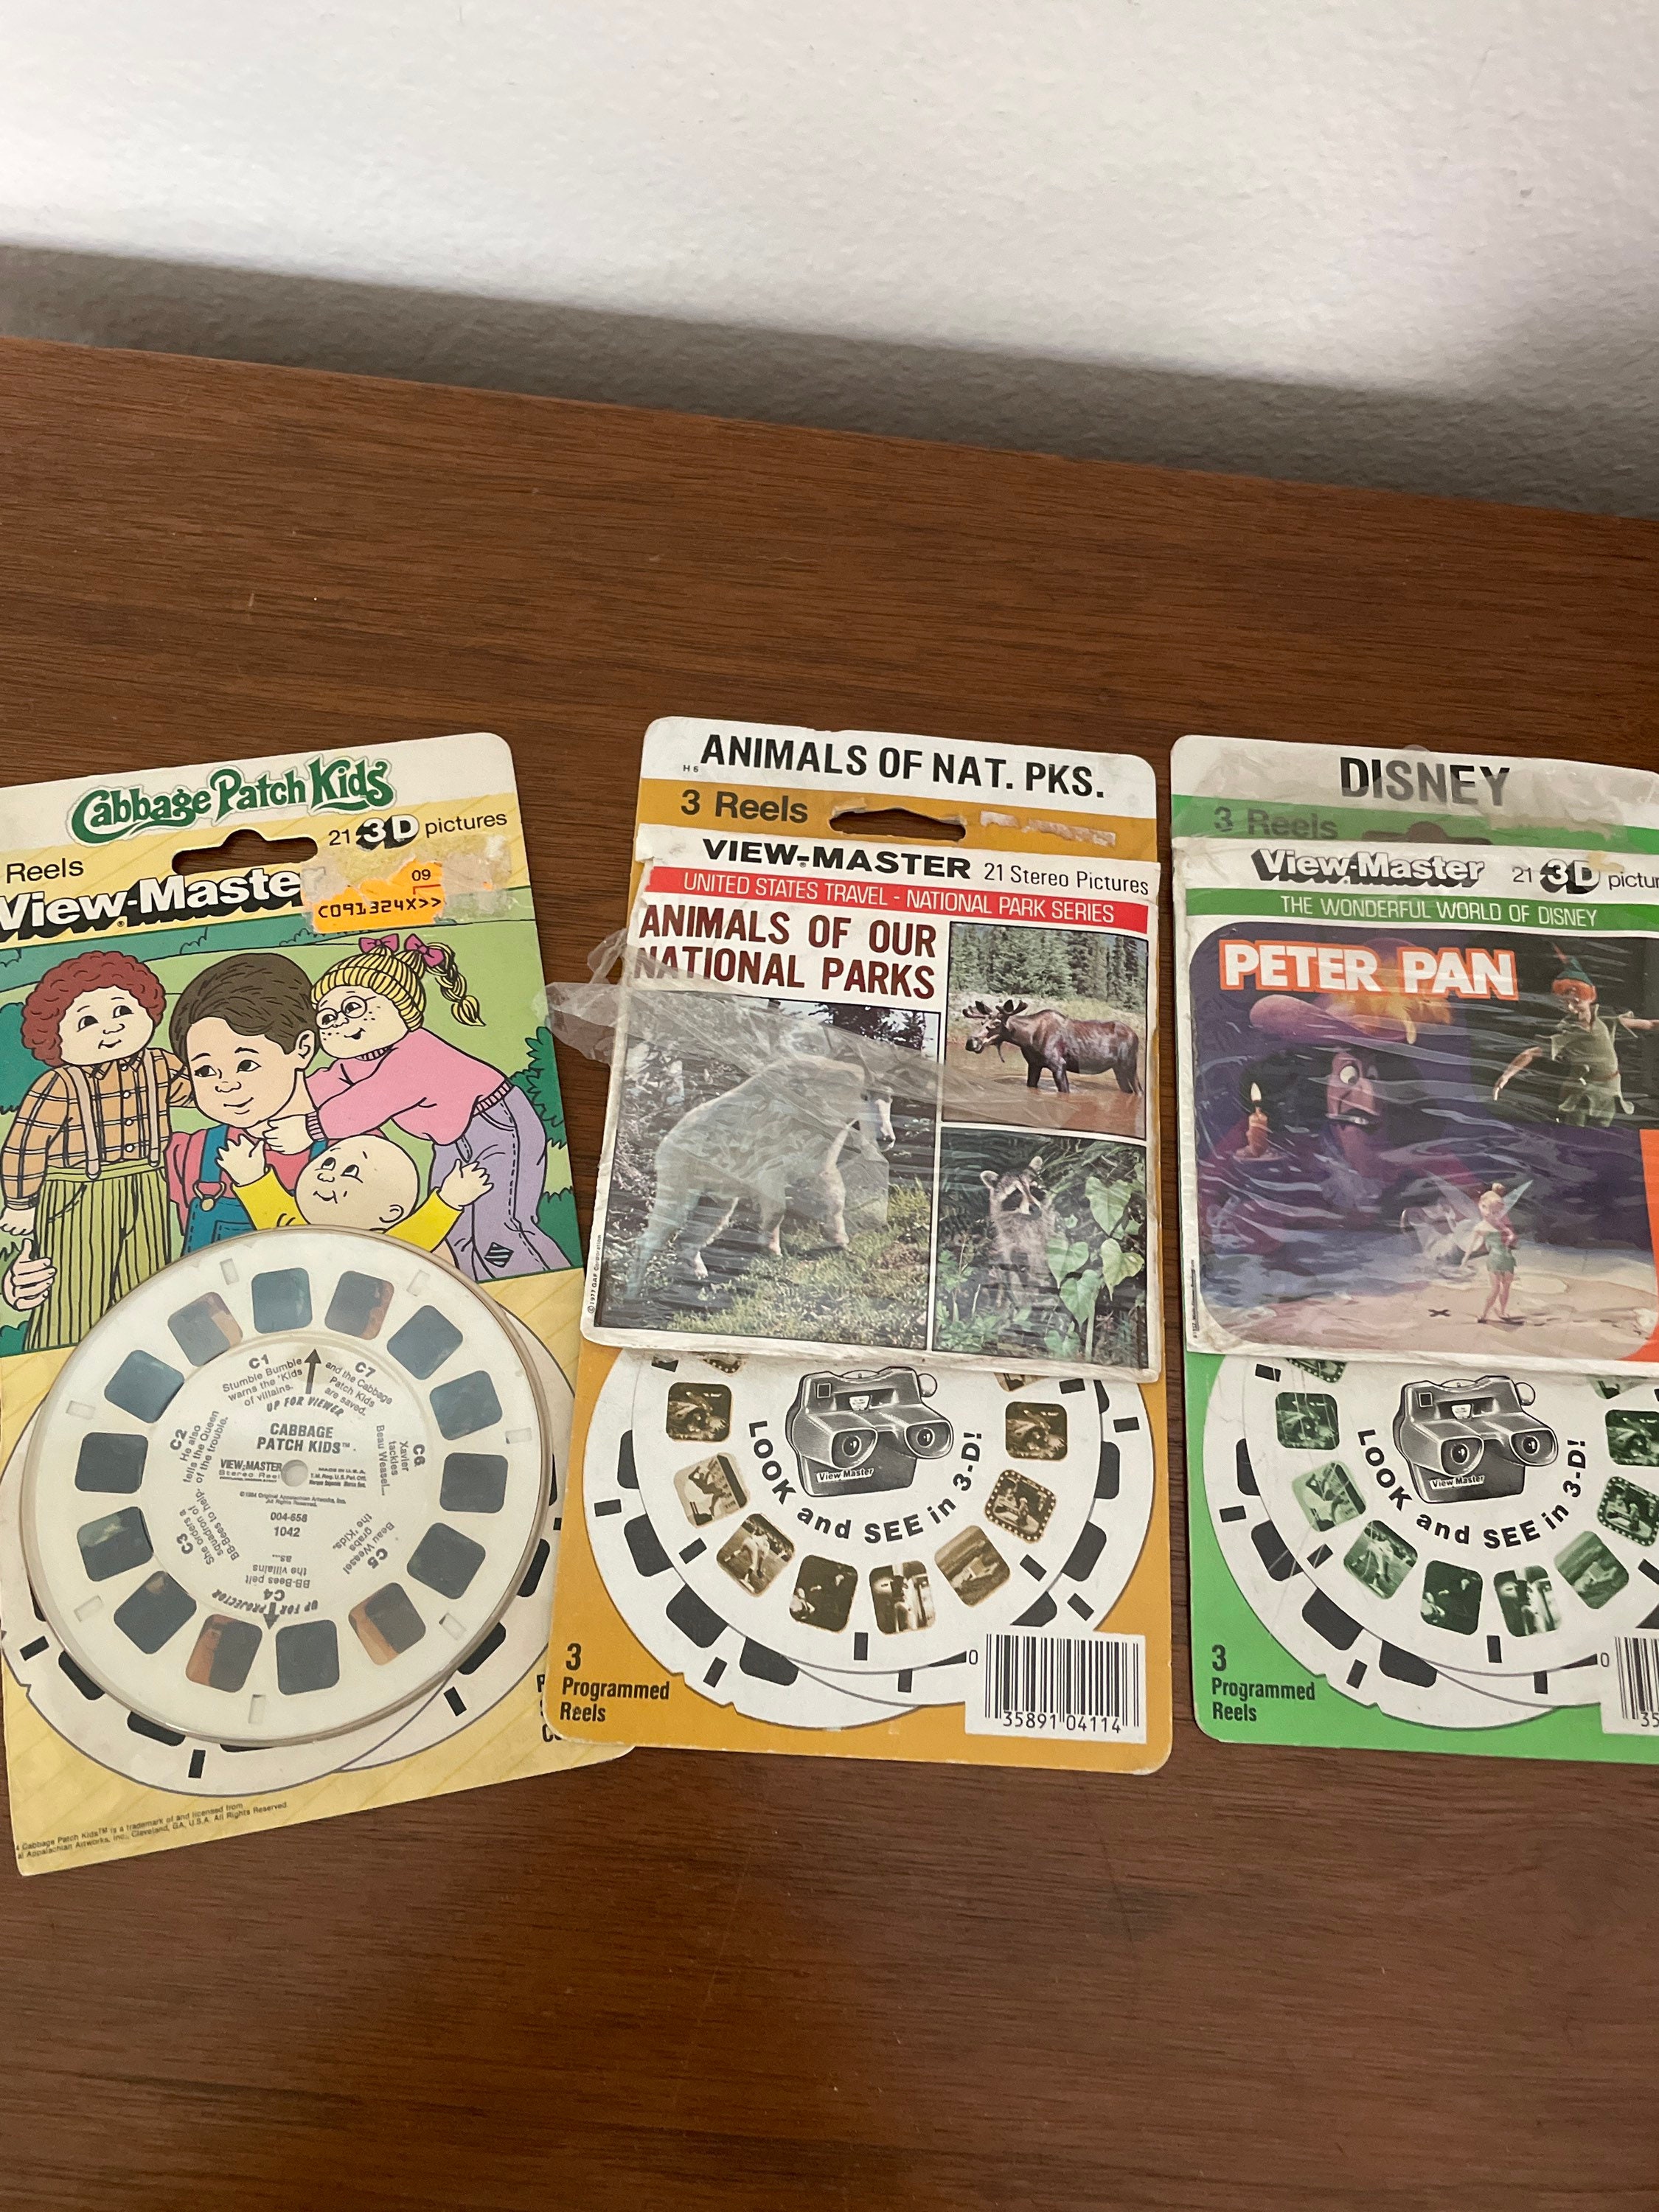 Vintage Viewmaster Reels 1980's View-master Reel Sets, Disney's Peter Pan,  Animals of National Parks, Cabbage Patch Kids 